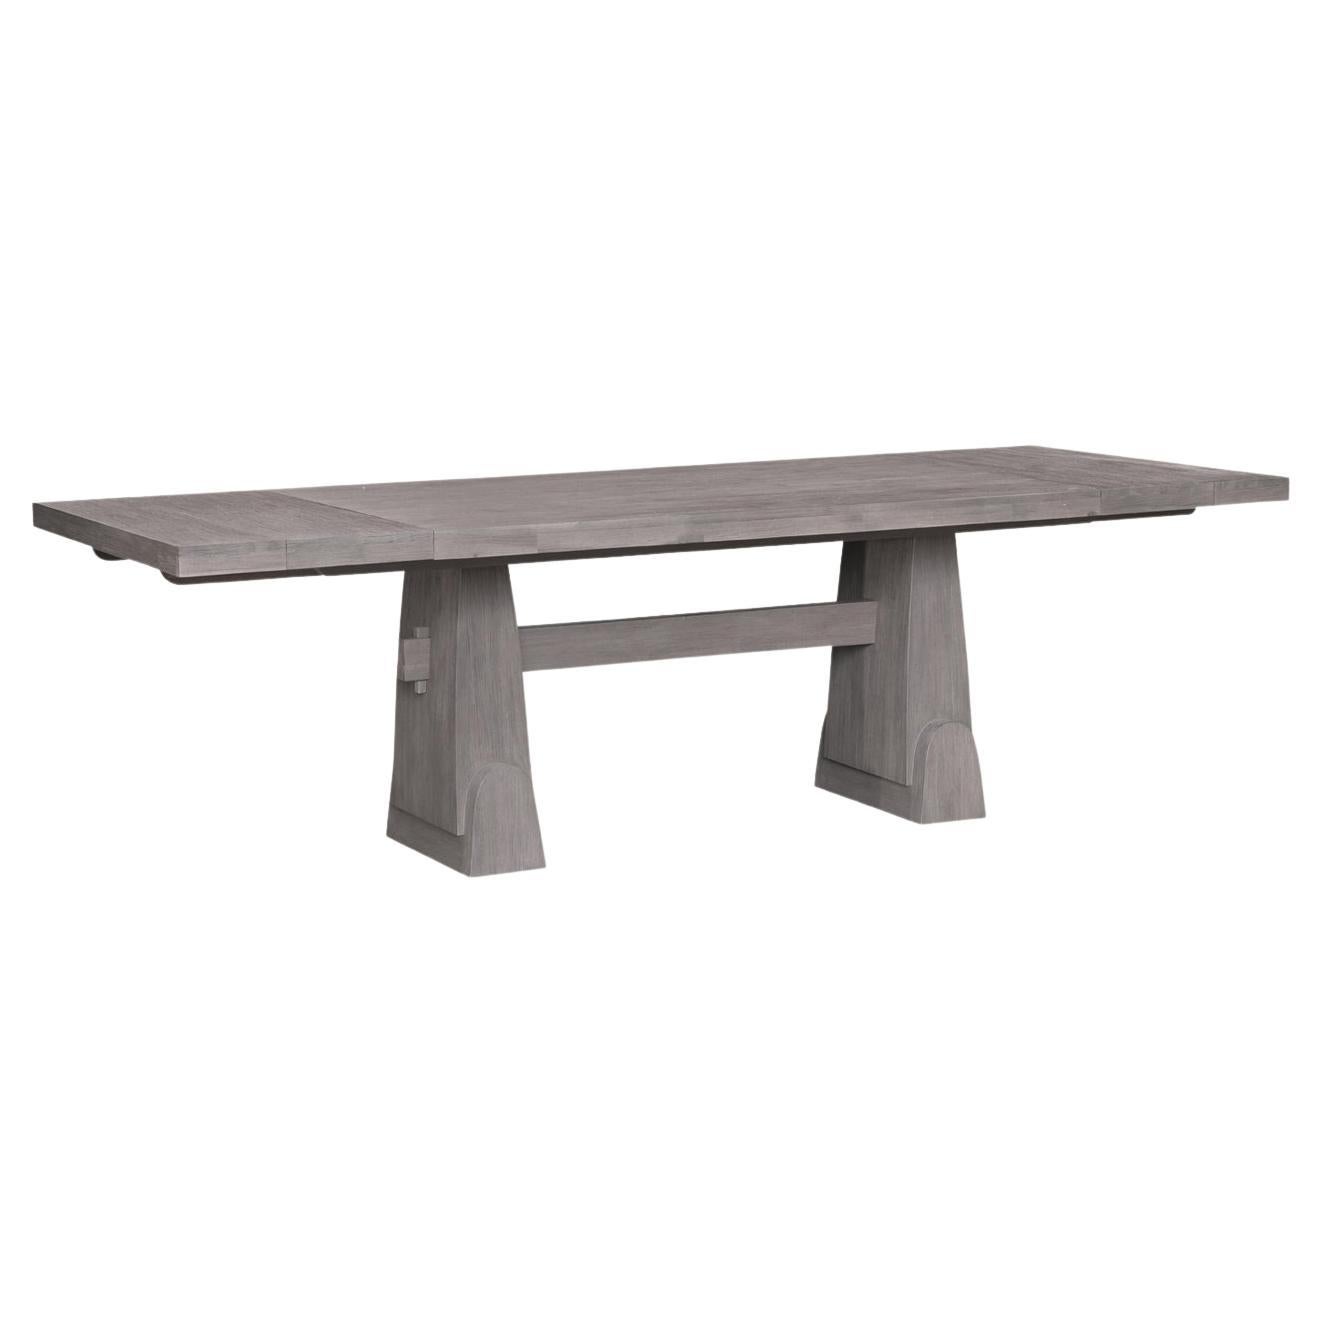 "Clichy" Sweedish Farm Style Extension Dining Table by Christiane Lemieux For Sale